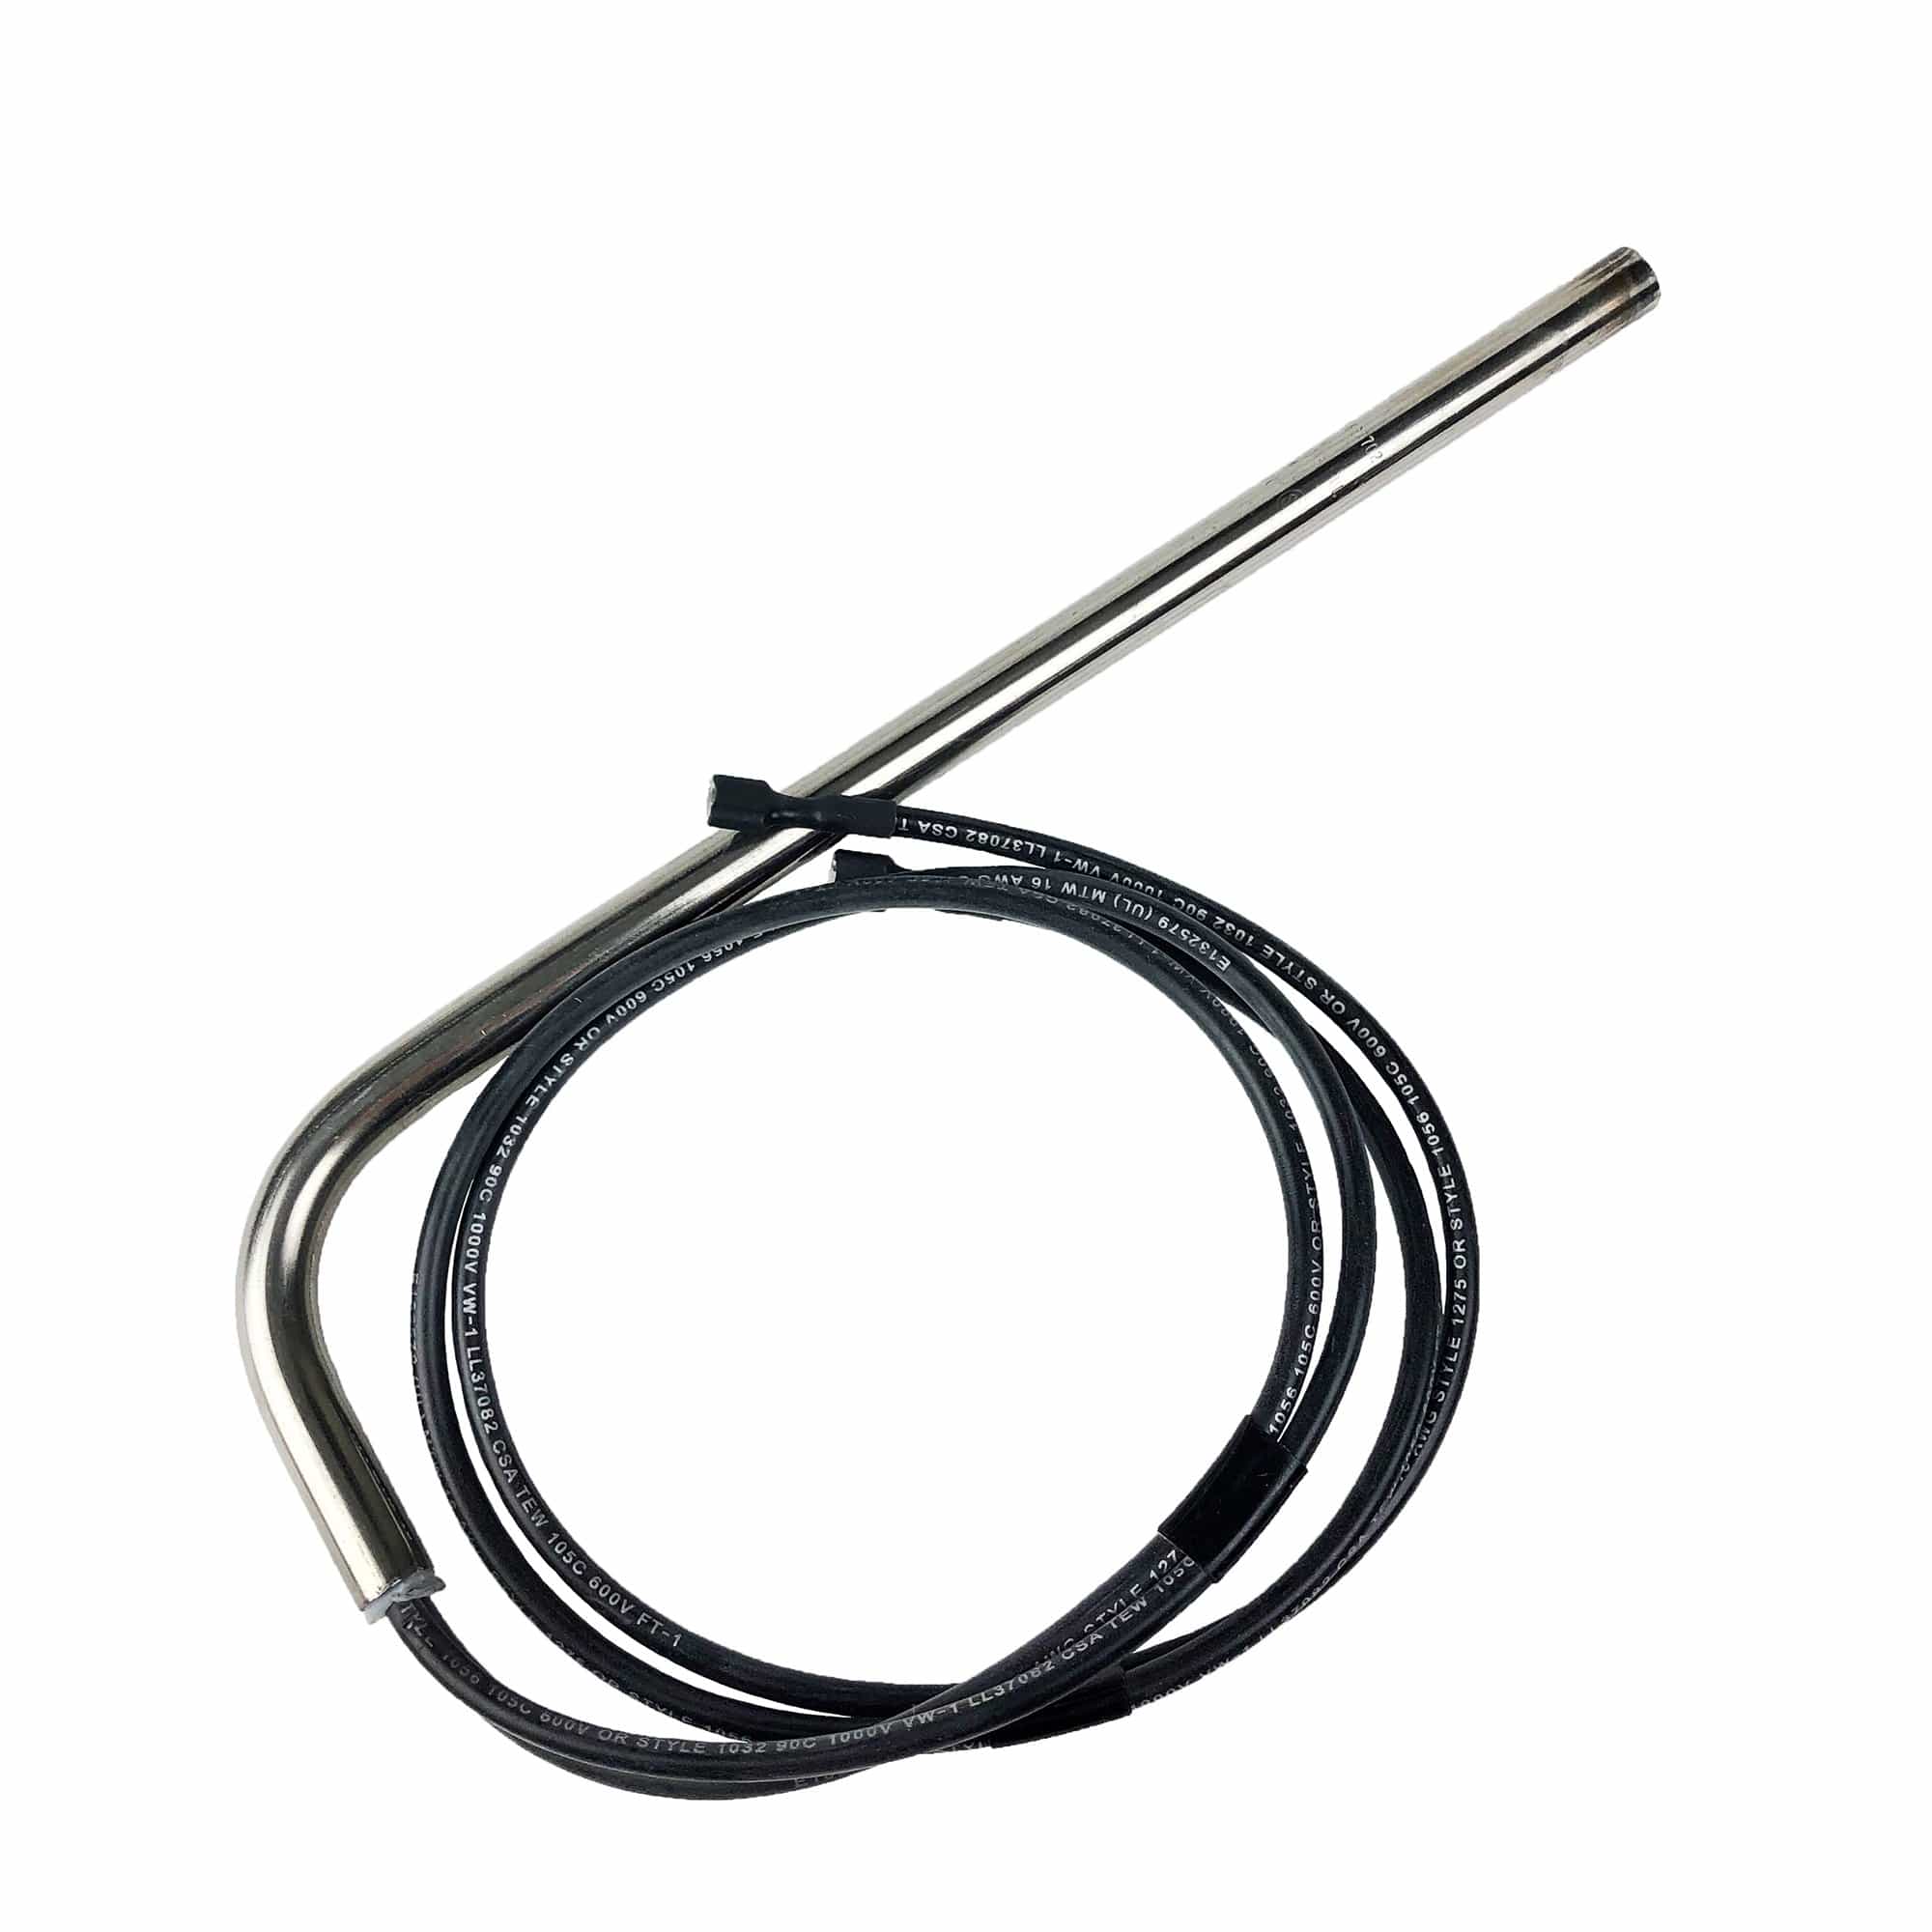 Norcold 621702 AC Heating Element